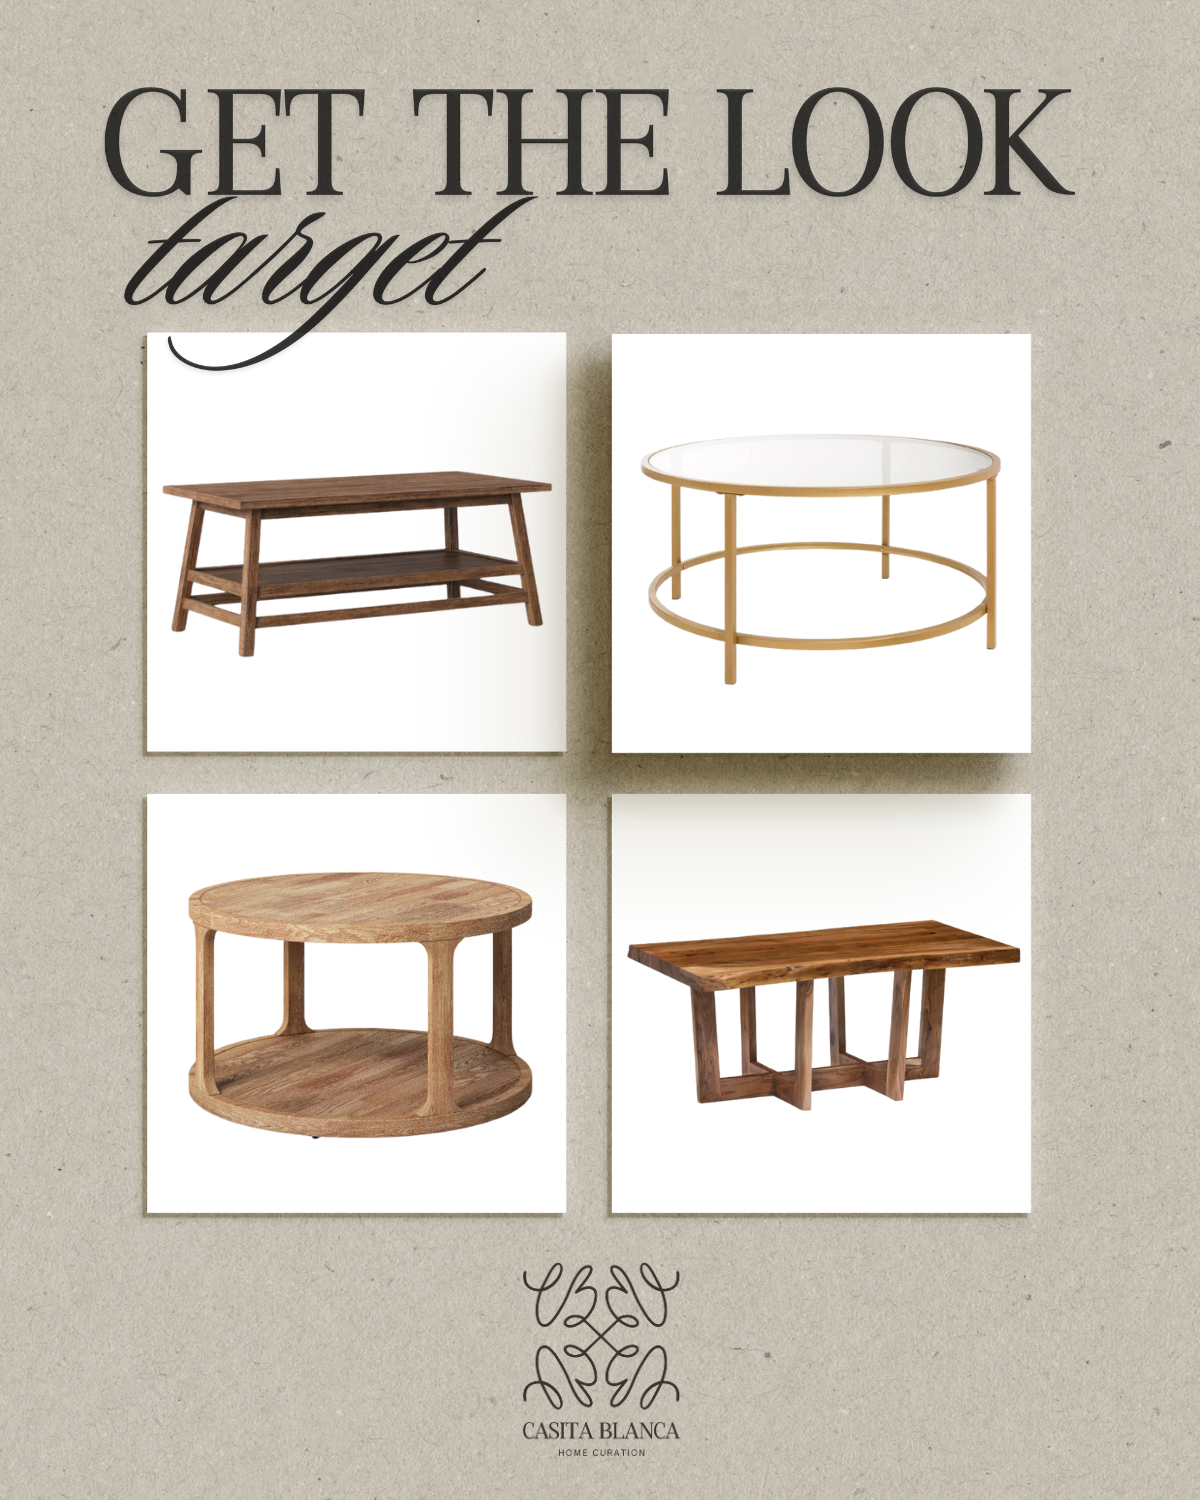 Get The Look | Coffee Table Styling​ coffee table, coffee table styling, home decor, designer home, designer look, table styling, target furniture, target coffee tables